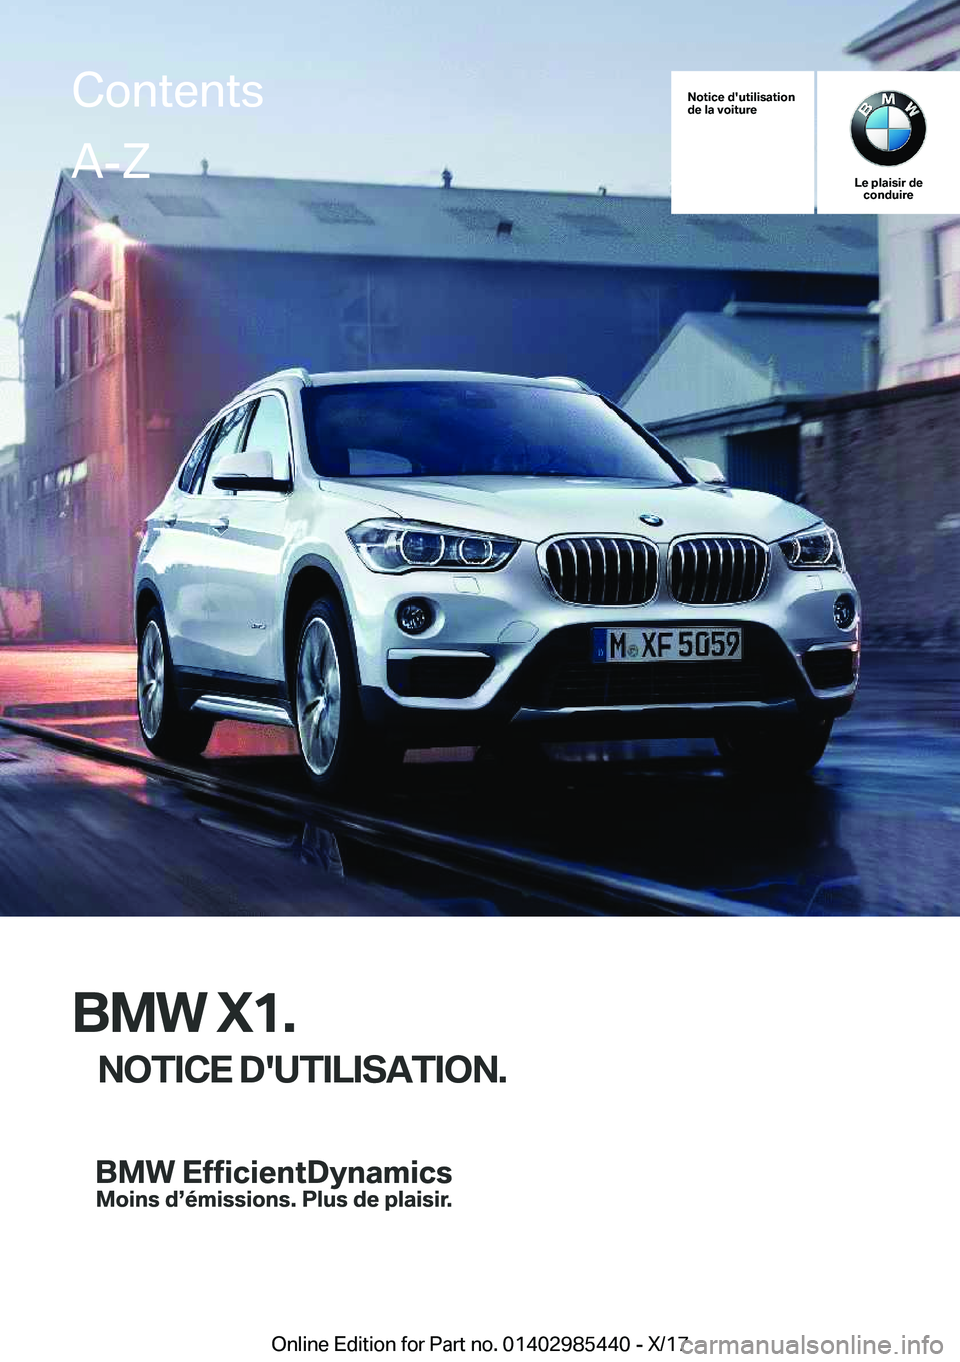 BMW X1 2018  Notices Demploi (in French) �N�o�t�i�c�e��d�'�u�t�i�l�i�s�a�t�i�o�n
�d�e��l�a��v�o�i�t�u�r�e
�L�e��p�l�a�i�s�i�r��d�e �c�o�n�d�u�i�r�e
�B�M�W��X�1�.
�N�O�T�I�C�E��D�'�U�T�I�L�I�S�A�T�I�O�N�.
�C�o�n�t�e�n�t�s�A�-�Z